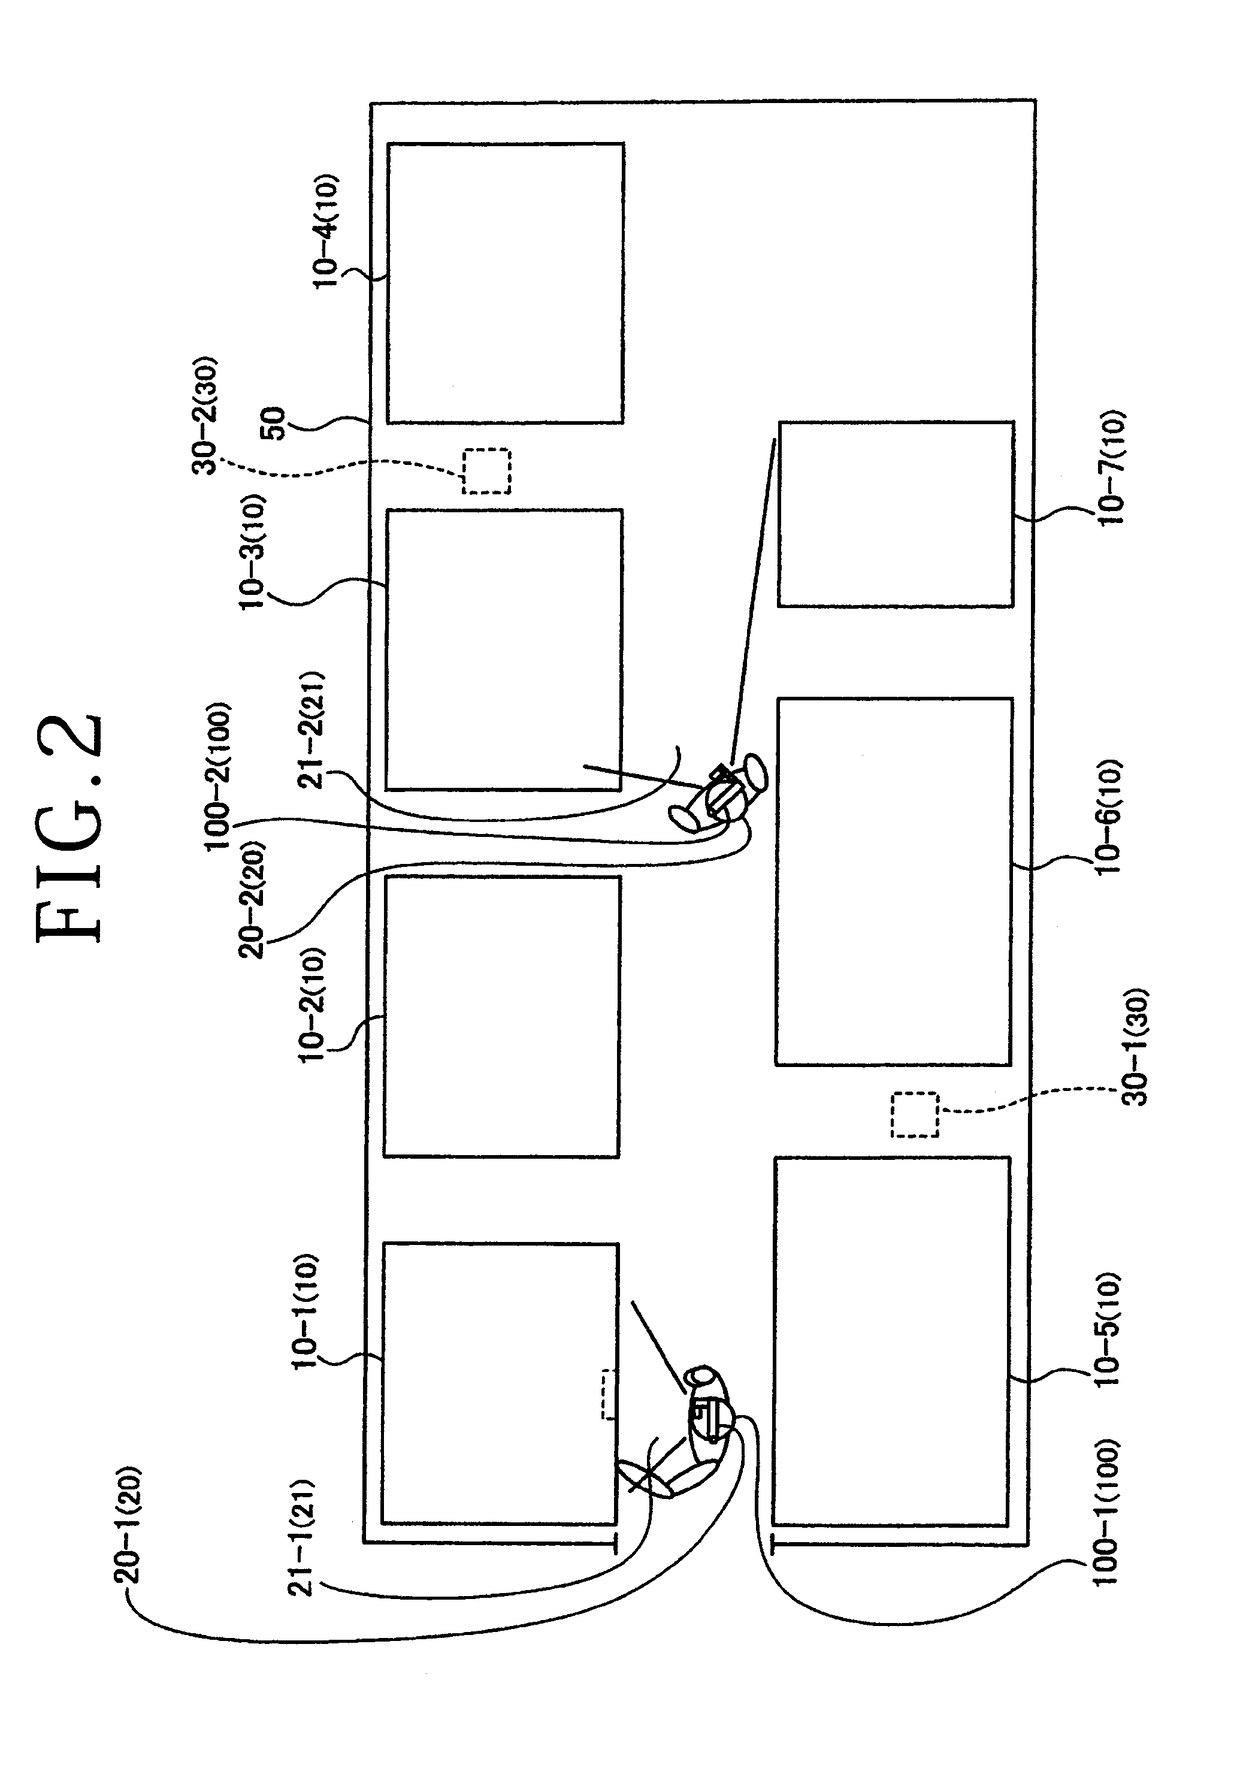 Information transfer mechanism for processing apparatus